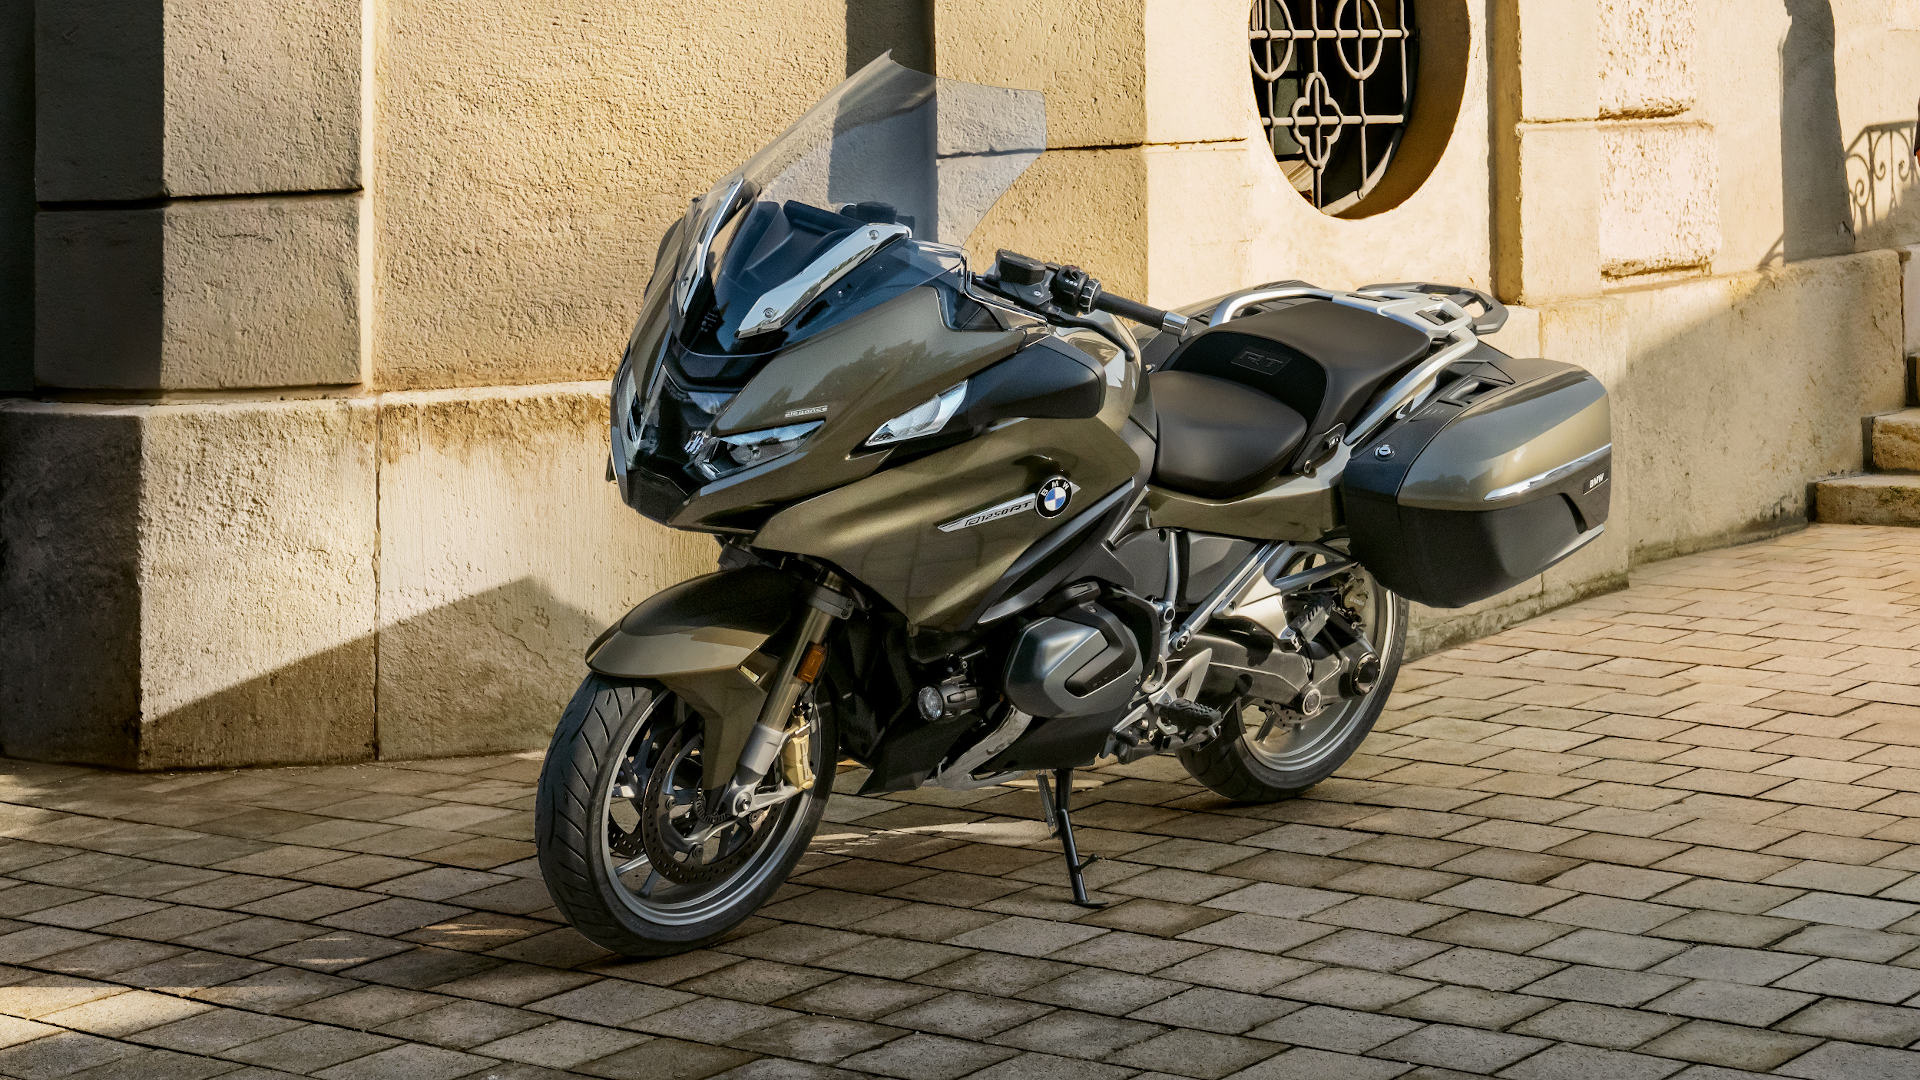 BMW R 1250 RT, Specs and features, Exciting launch, Premium motorcycle, 1920x1080 Full HD Desktop